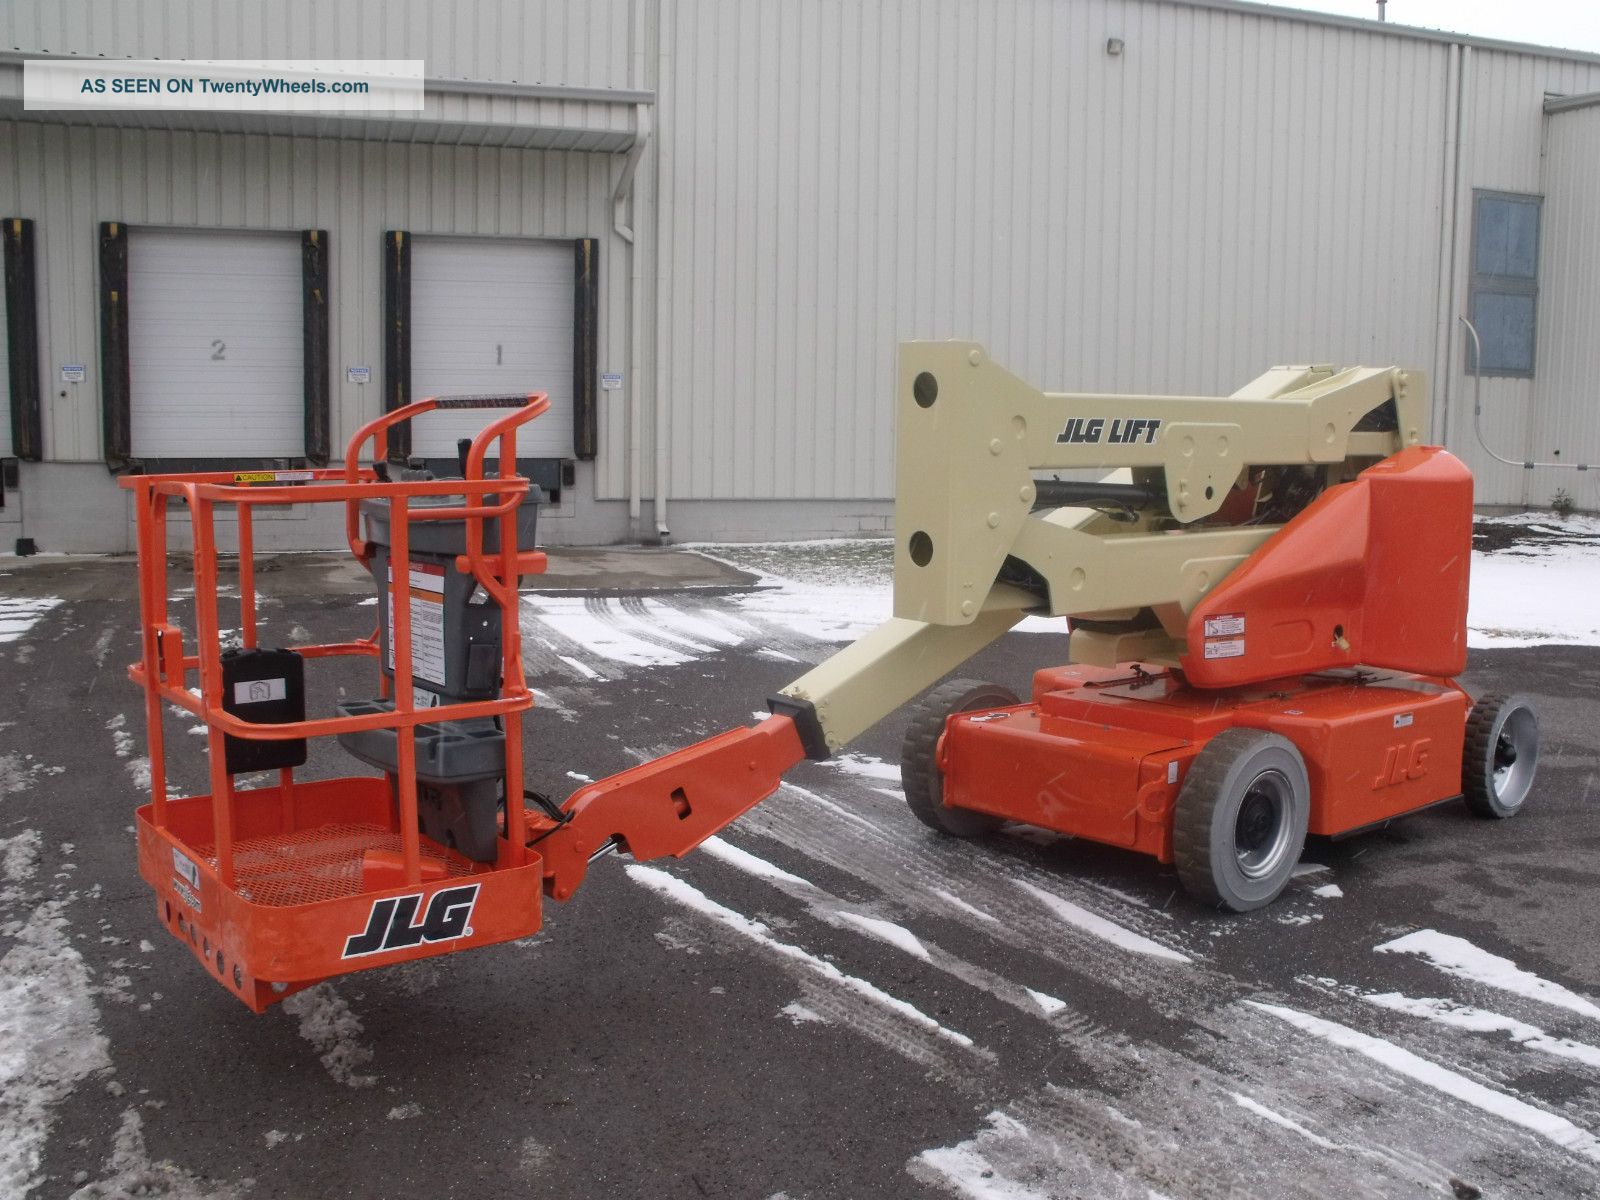 Jlg E400an Aerial Manlift Boom Lift Man Boomlift Painted Works In Narrow Isles Lifts photo